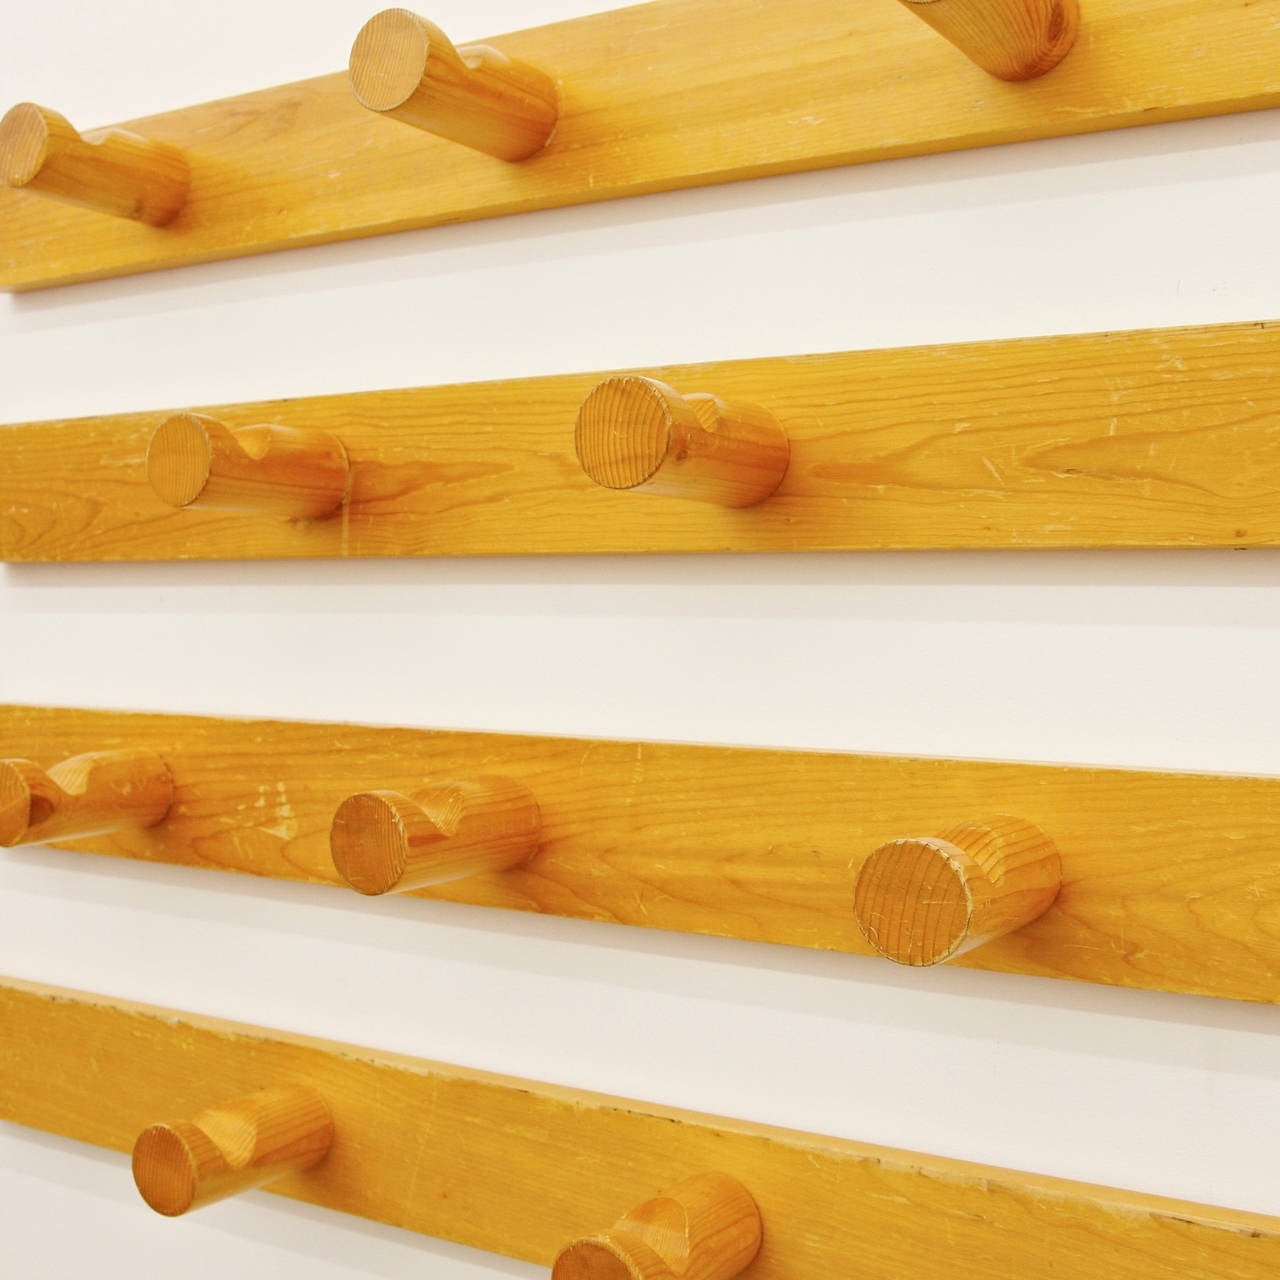 Coat Rack designed by Charlotte Perriand for Les Arcs ski Resort around 1960, manufactured in France.
Pine wood.

In good original condition, with minor wear consistent with age and use, preserving a beautiful patina.

Charlotte Perriand (1903